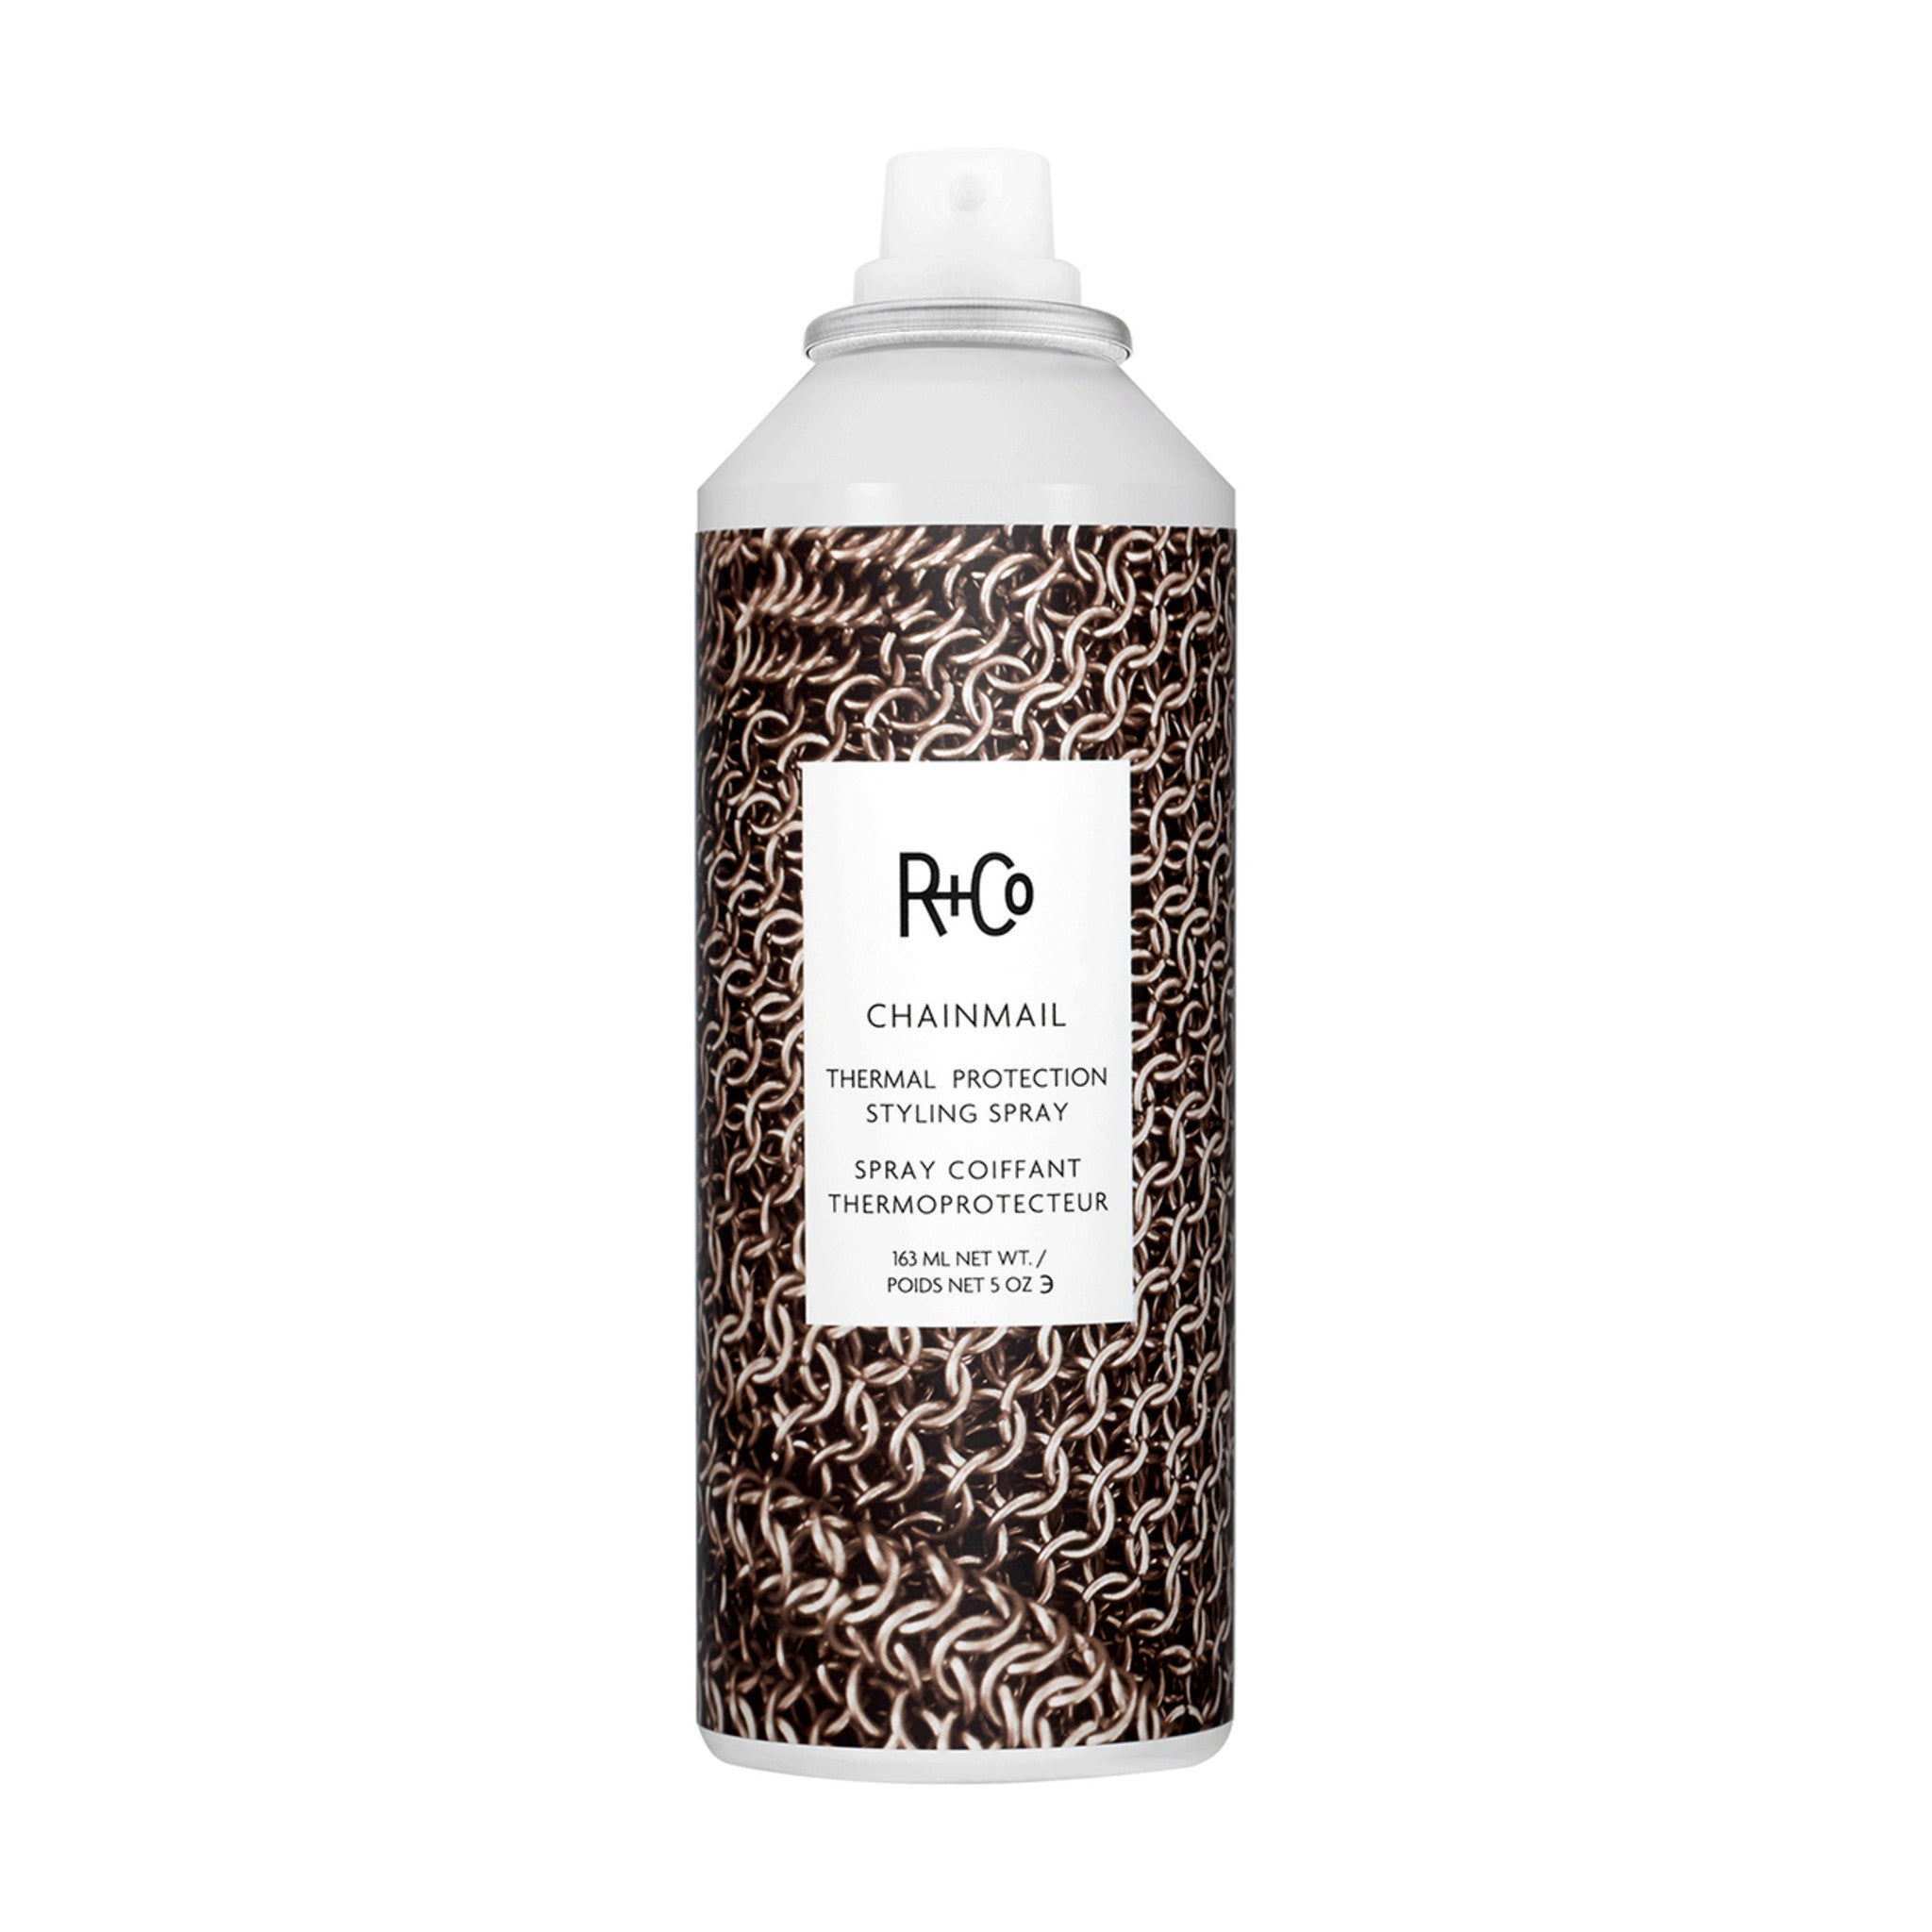 R+Co Chainmail Thermal Protection Styling Spray main image.